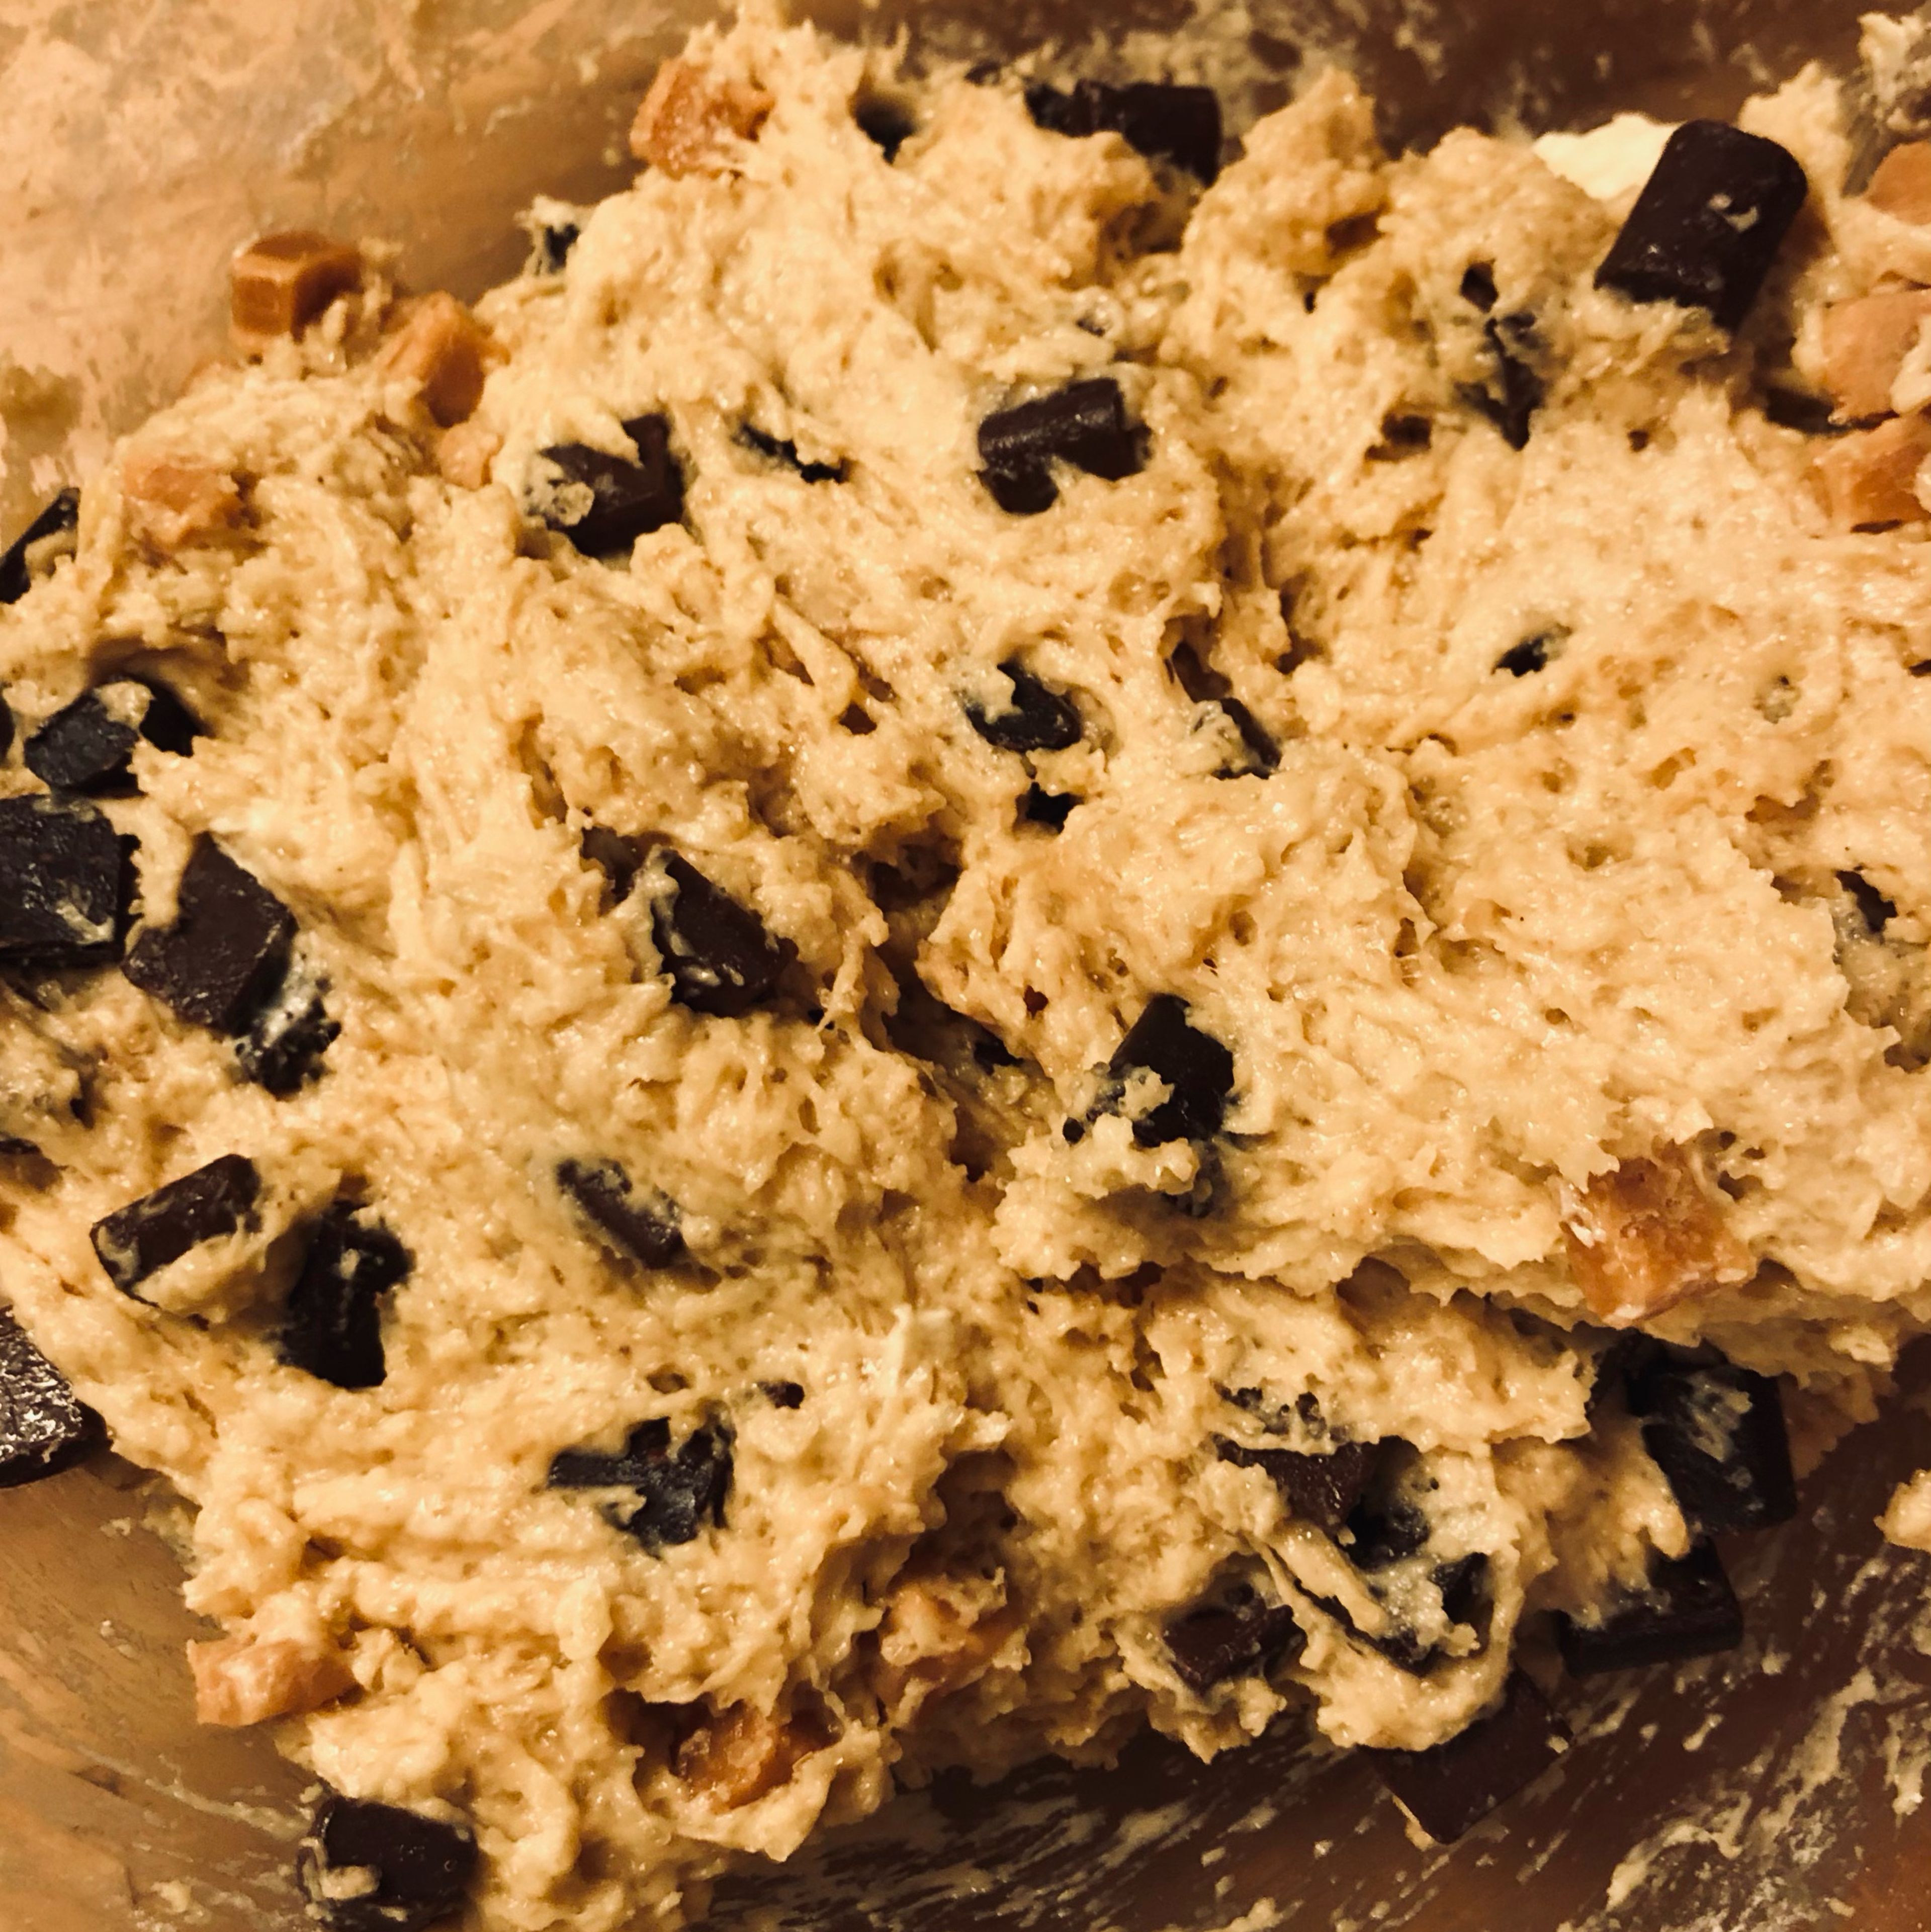 To this bowl, Gently add in the dry ingredients and mix well ( if too dry add a tablespoon of oat milk). Then, using a rubber spatula, fold through the salted caramel and chocolate chips.